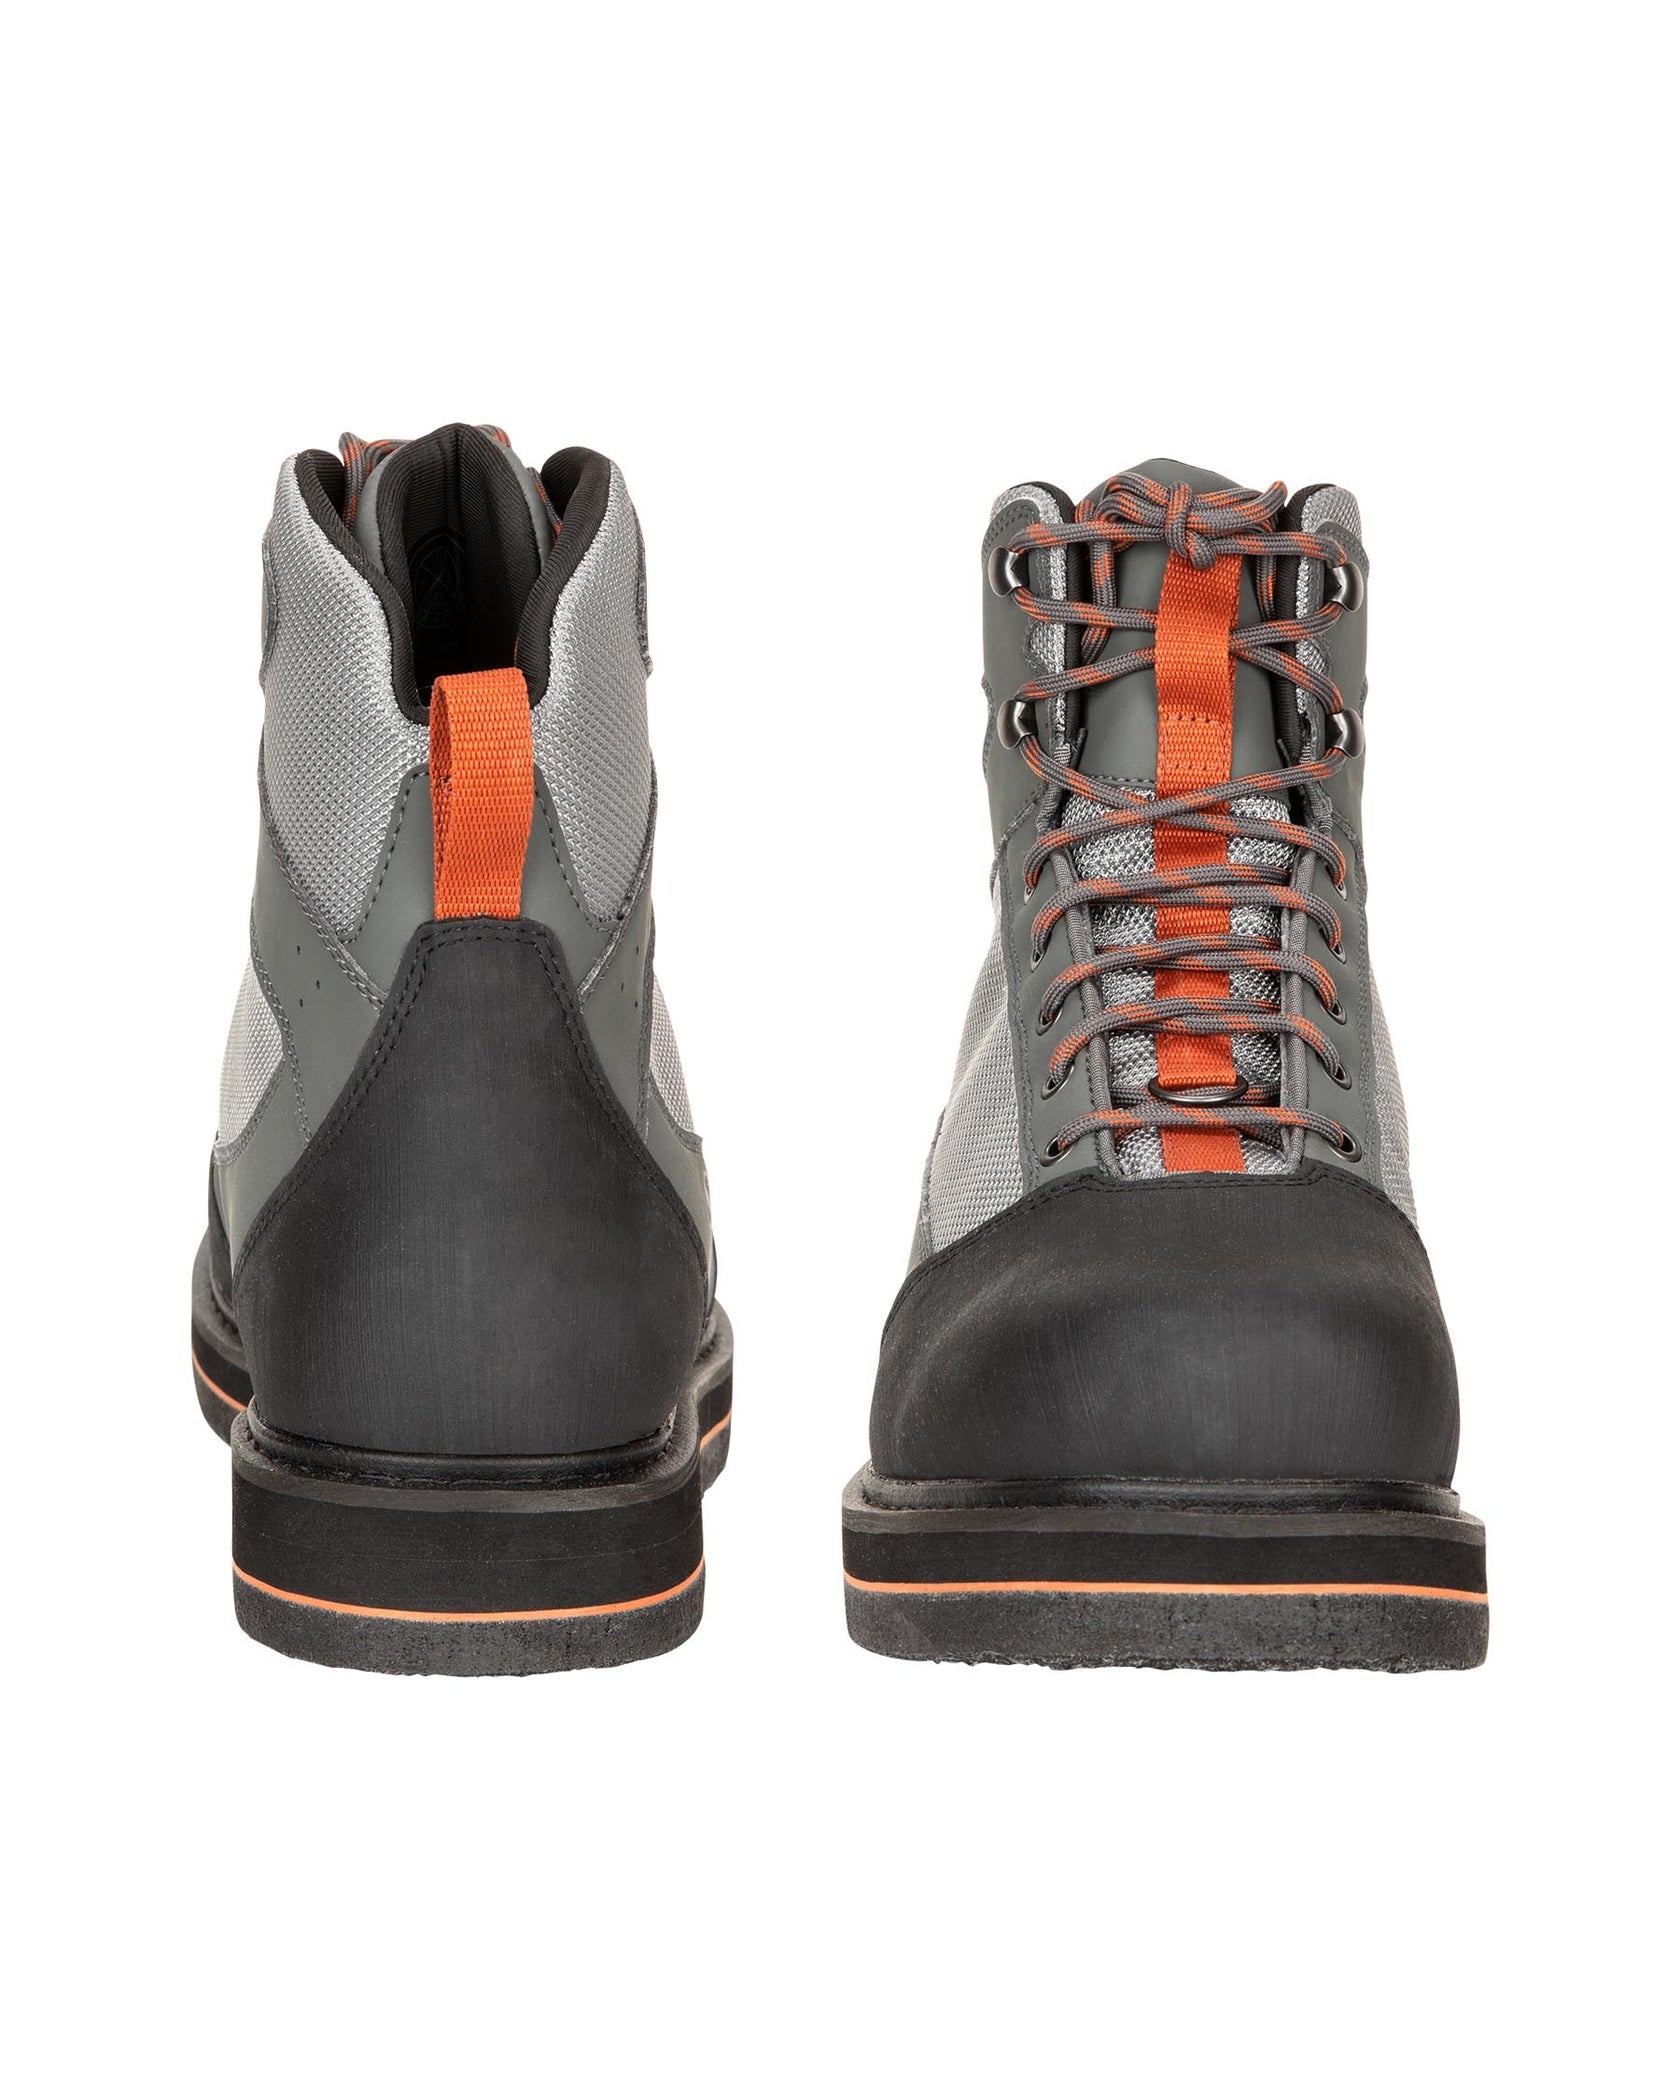 SIMMS TRIBUTARY FELT SOLE WADING BOOT